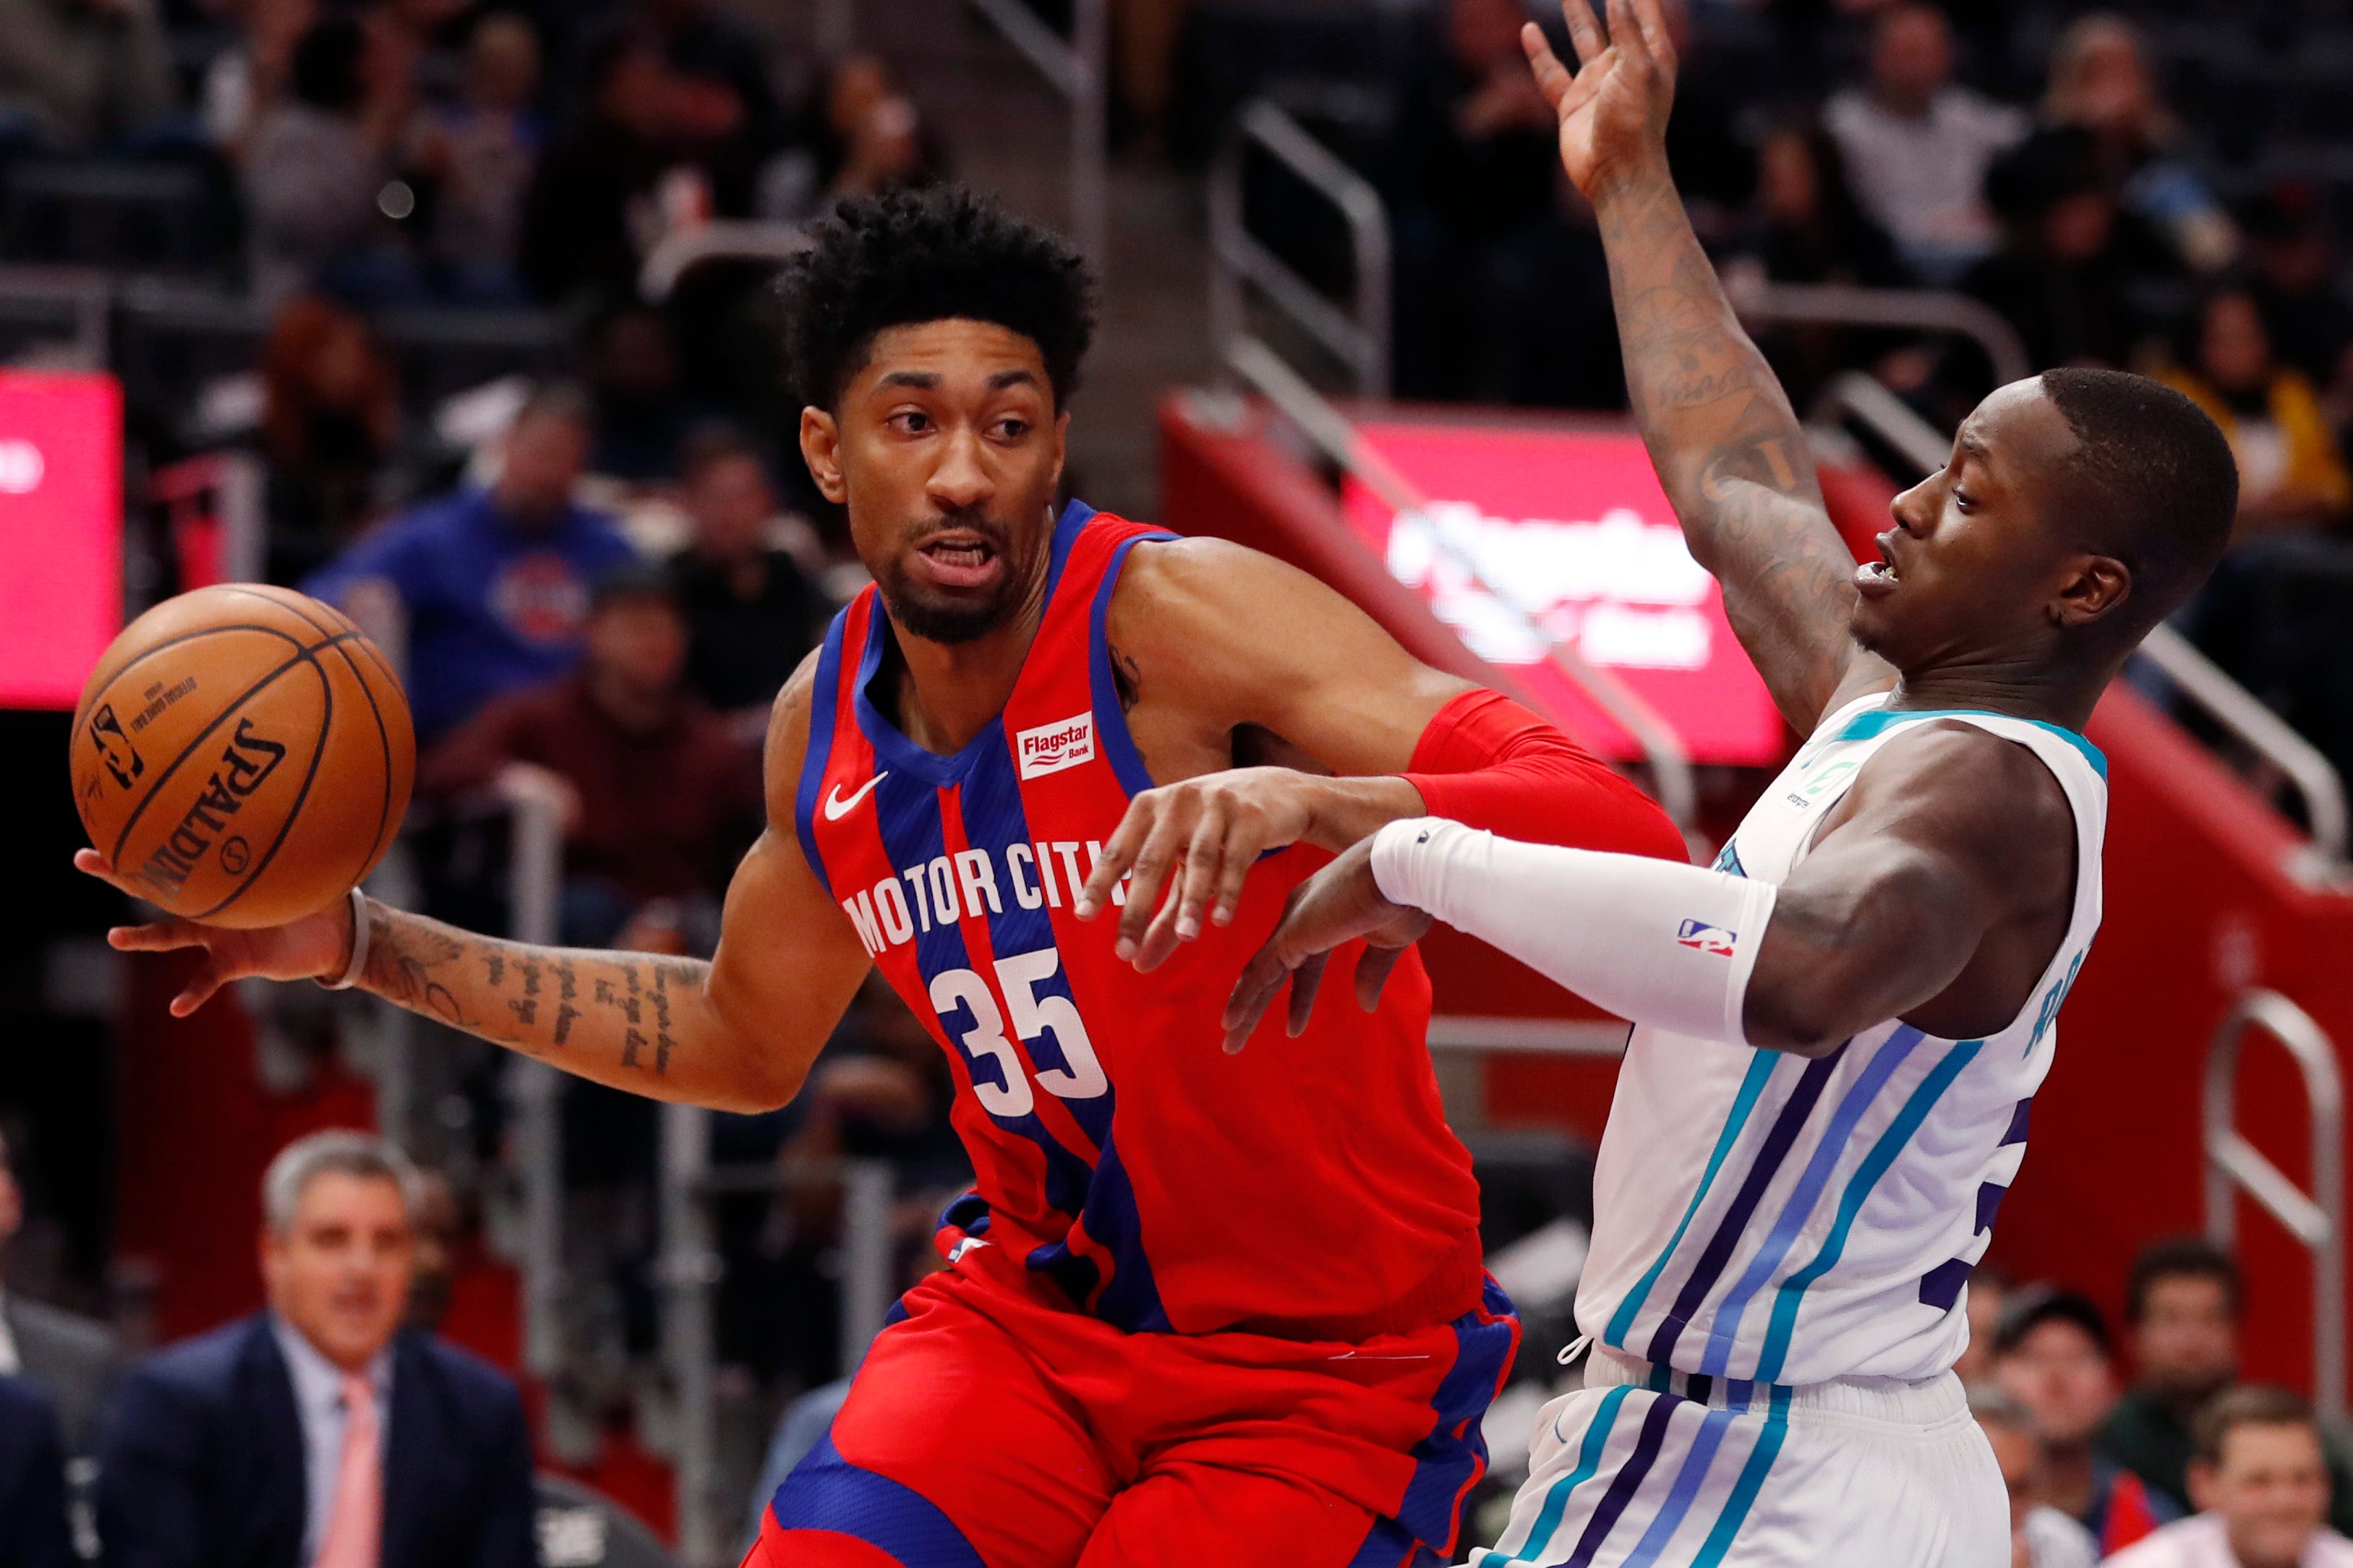 Pistons forward Christian Wood looks to pass as Hornets guard Terry Rozier defends.